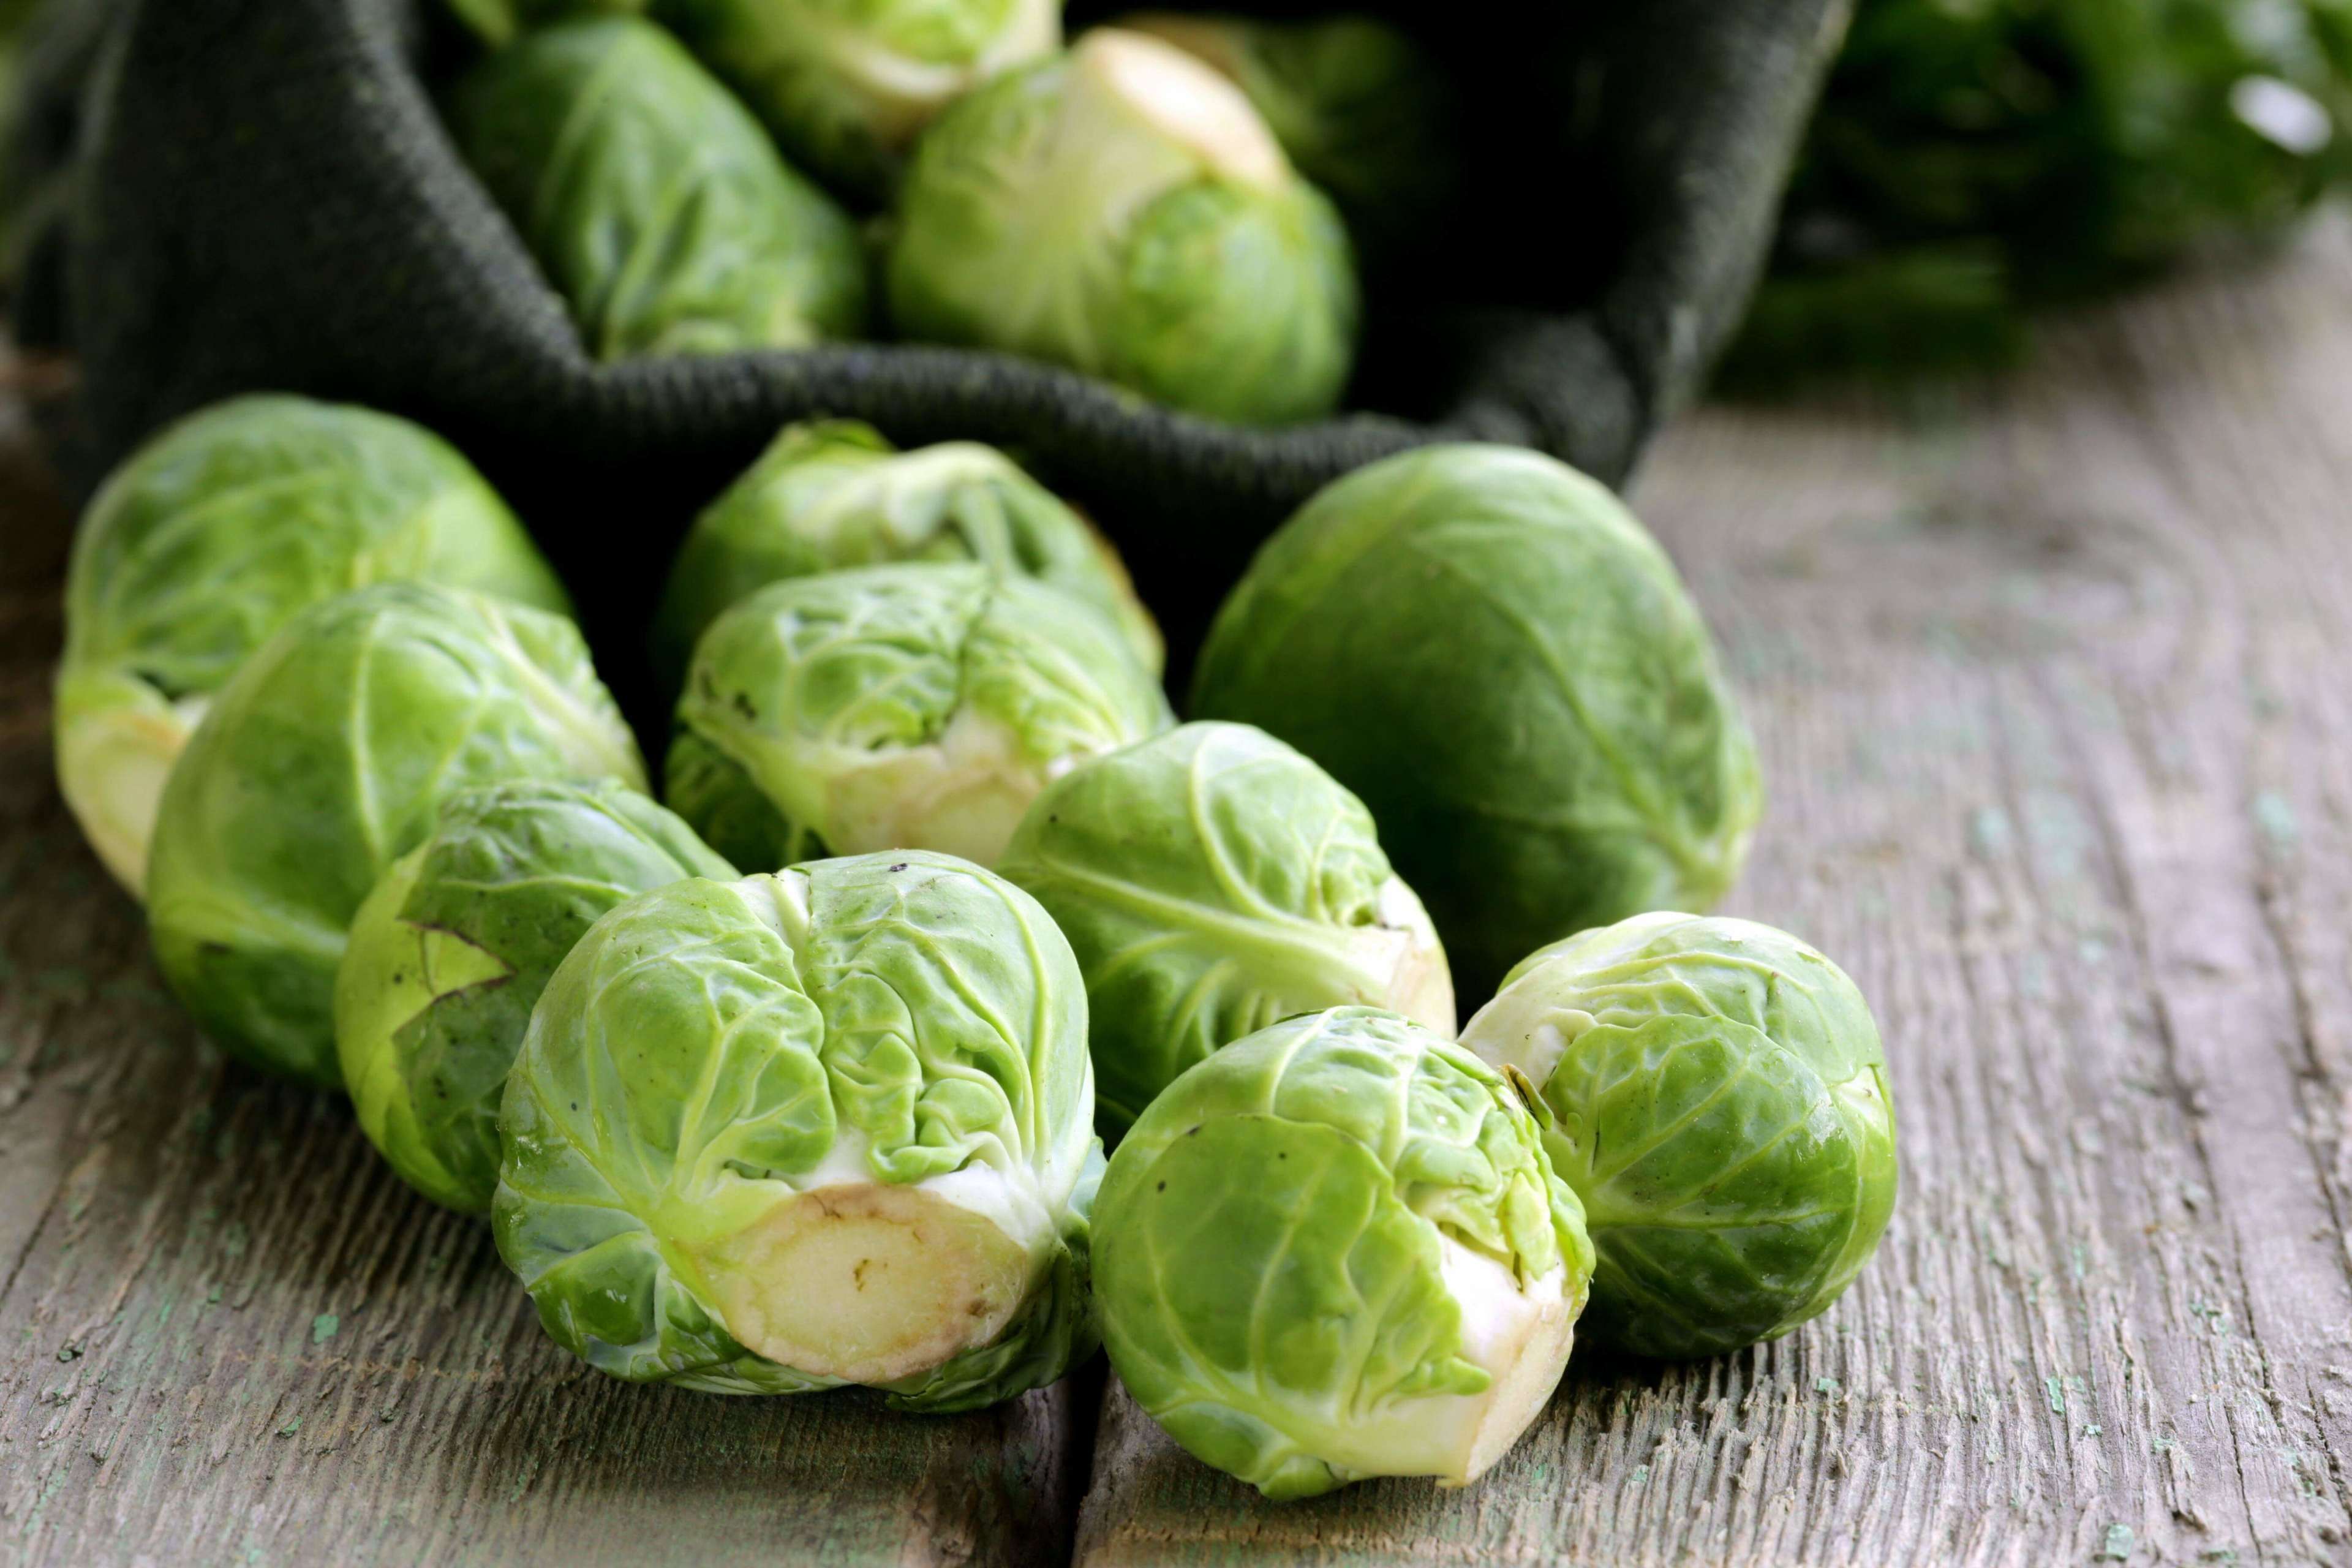 Green brussel sprouts